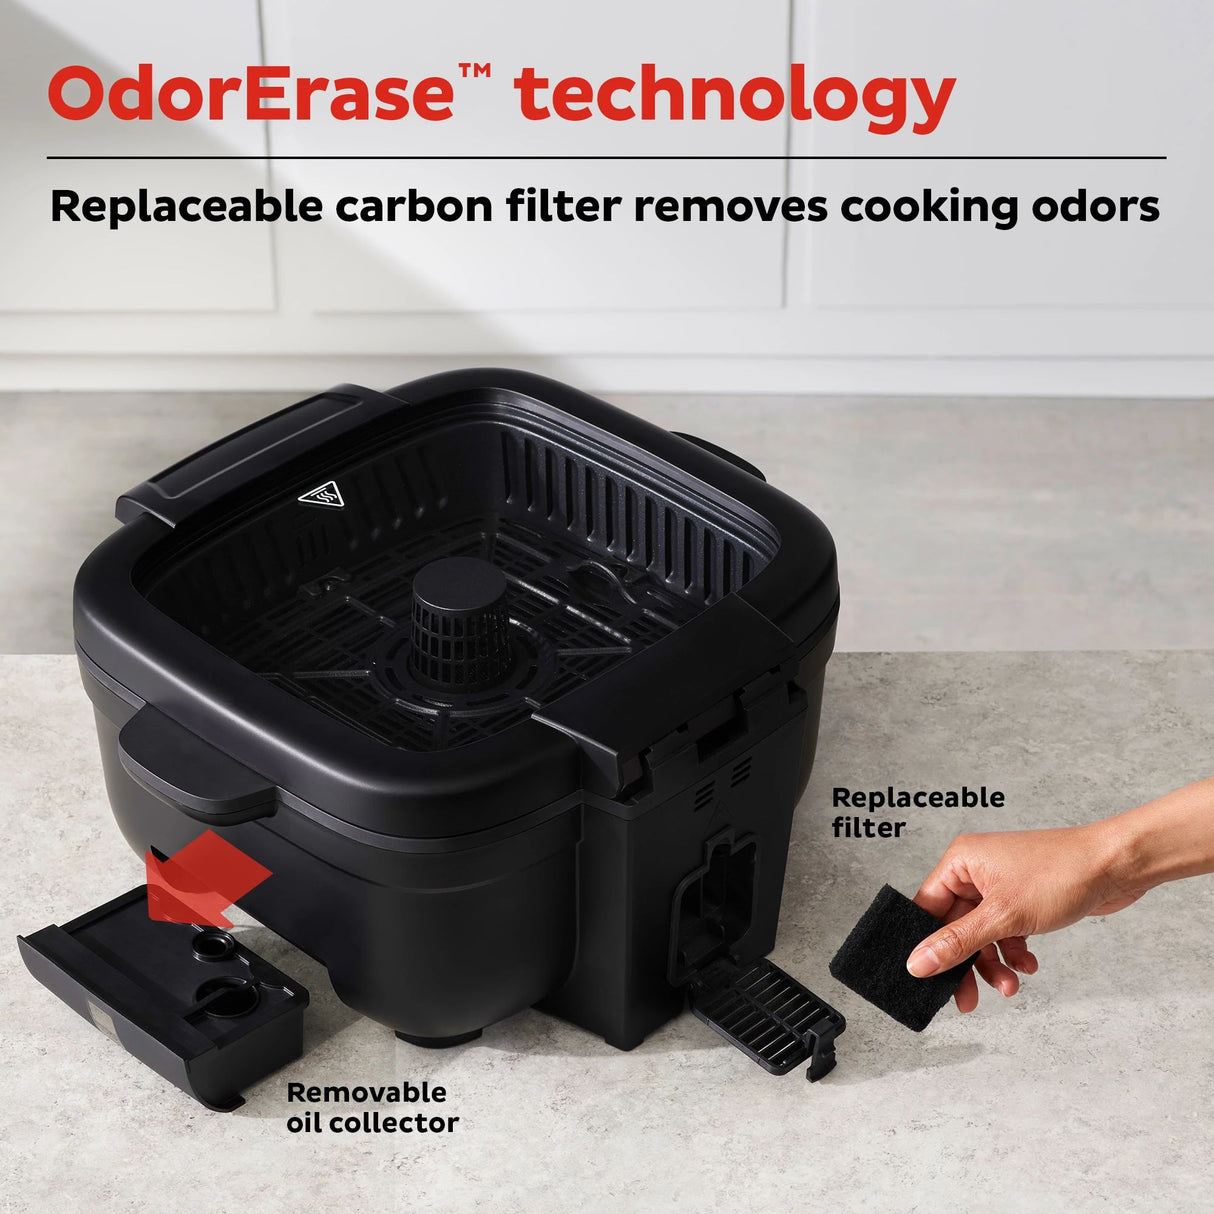  Instant® Indoor Grill and Air Fryer with text OdorErase technology